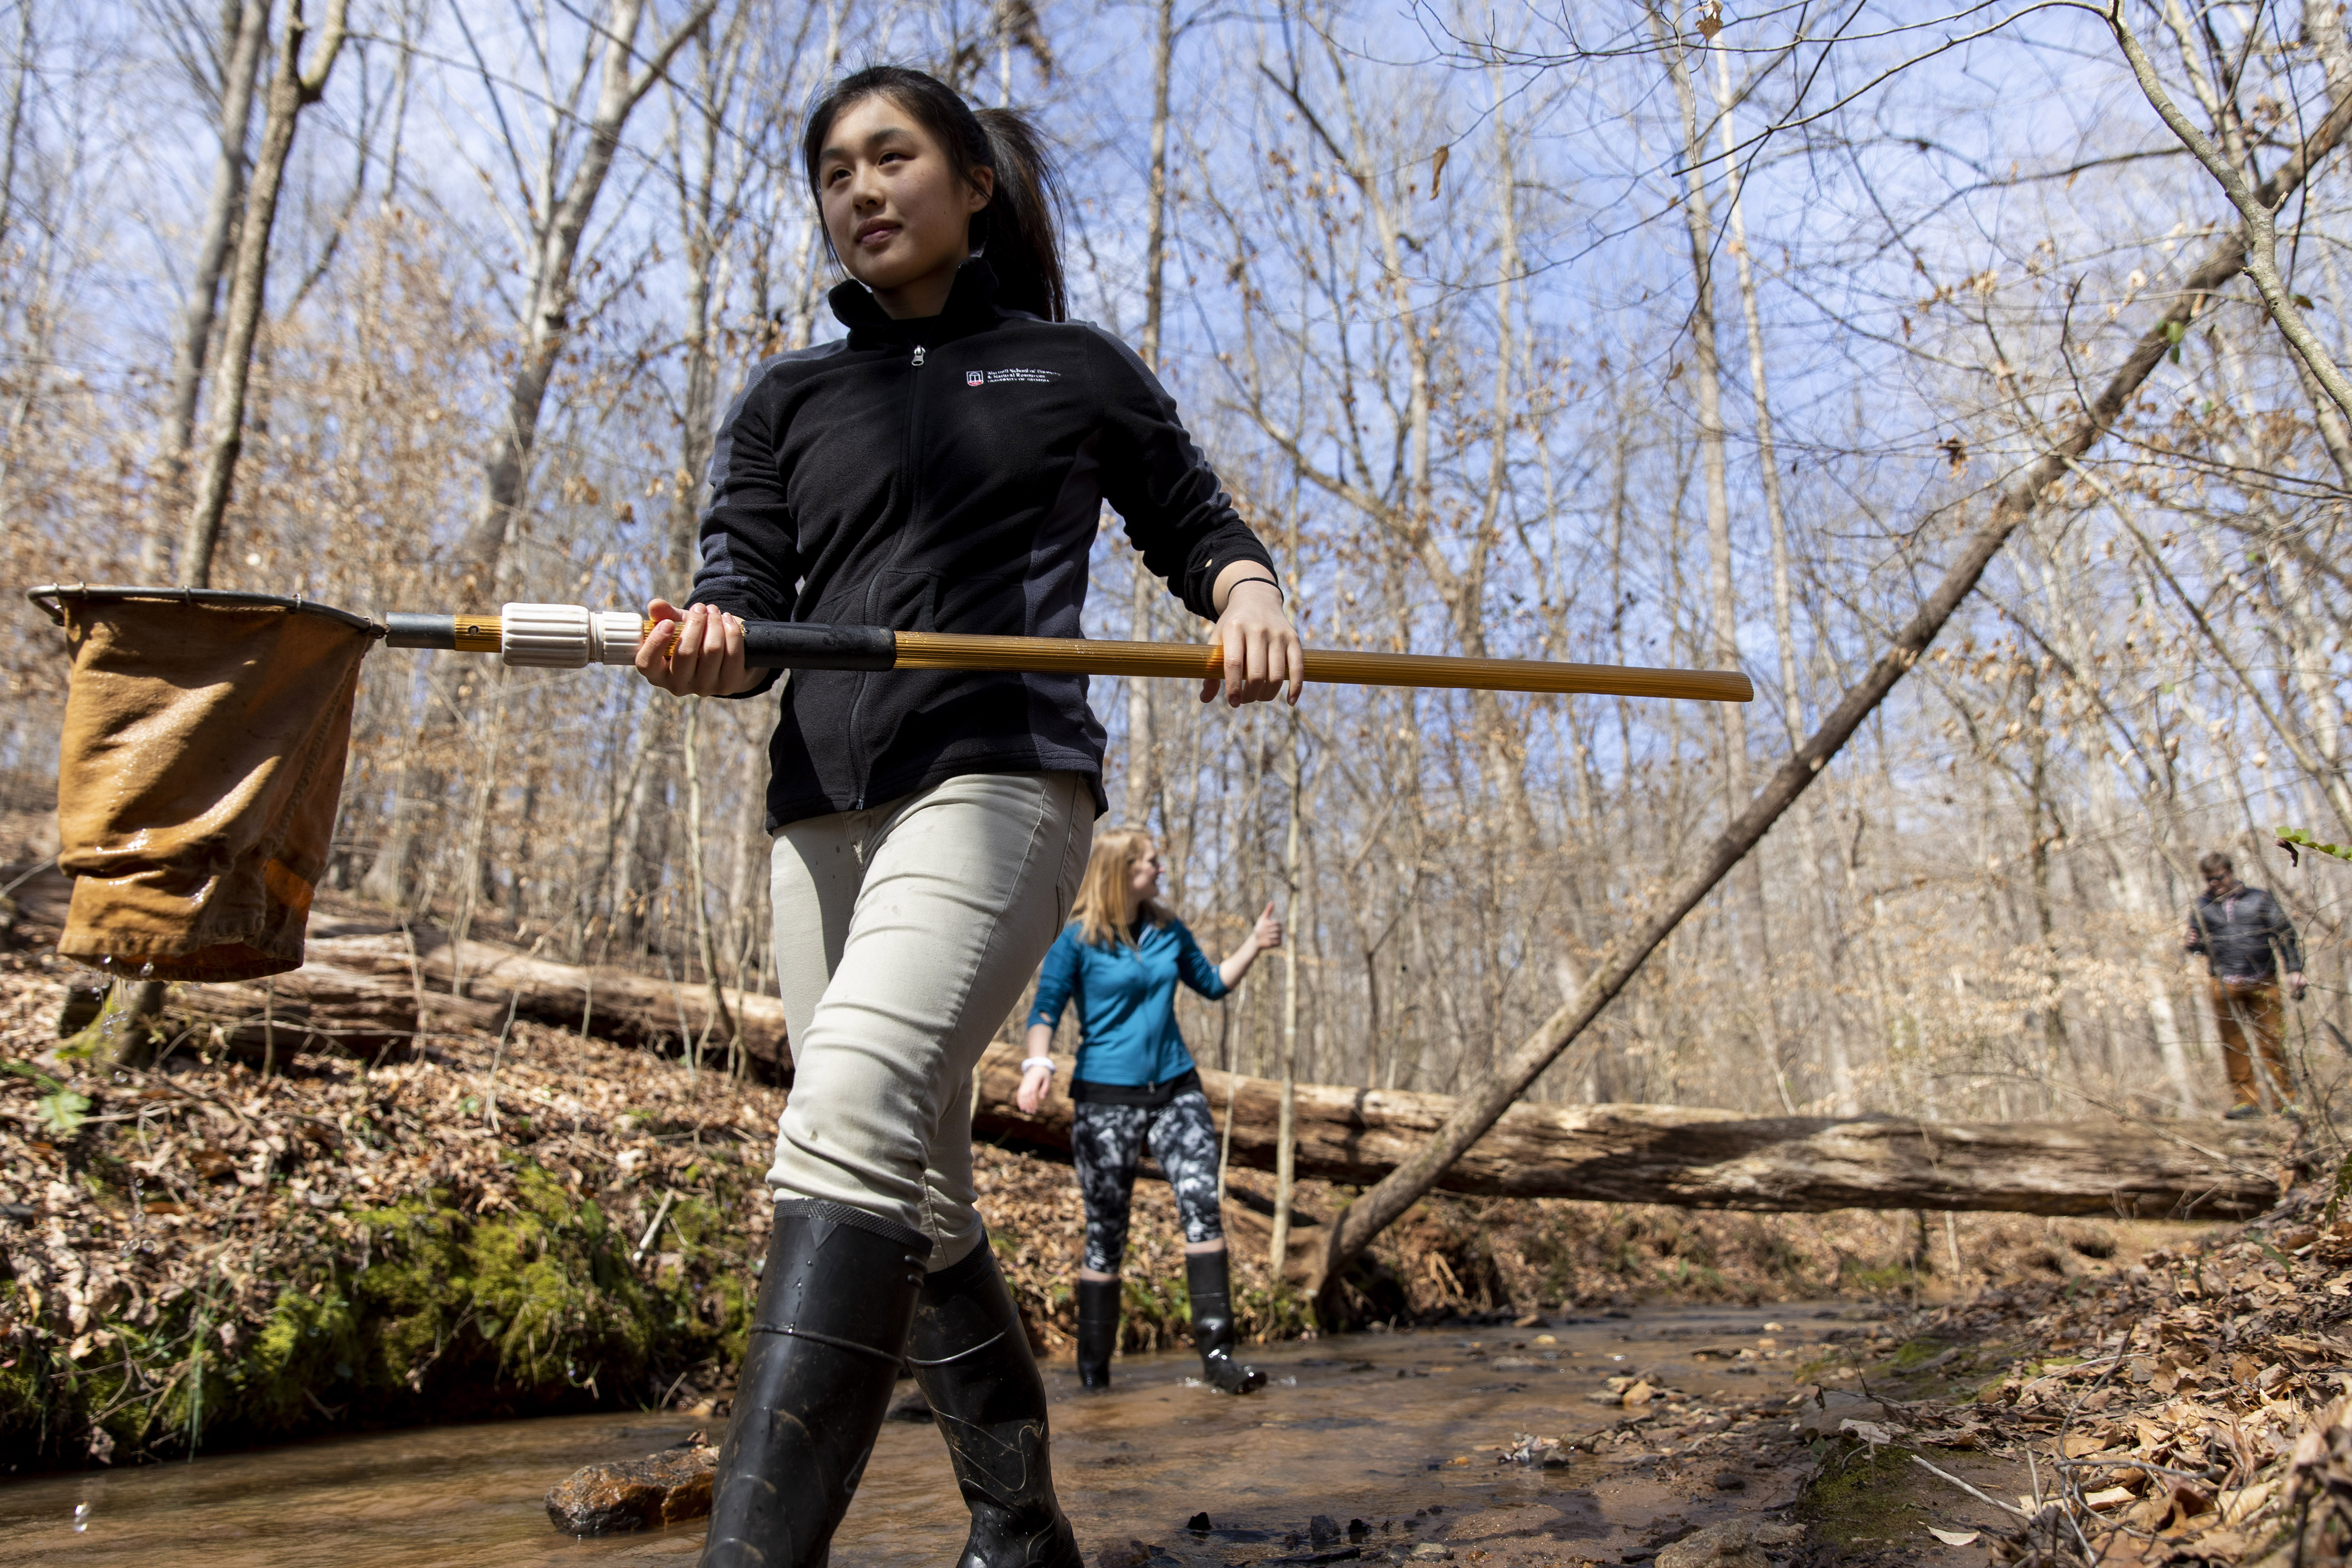 Undergraduate Peyton Niebanck carries a net as she works with her group sampling as part of their Stream Ecology Lab in a stream off the orange trail at the State Botanical Gardens.